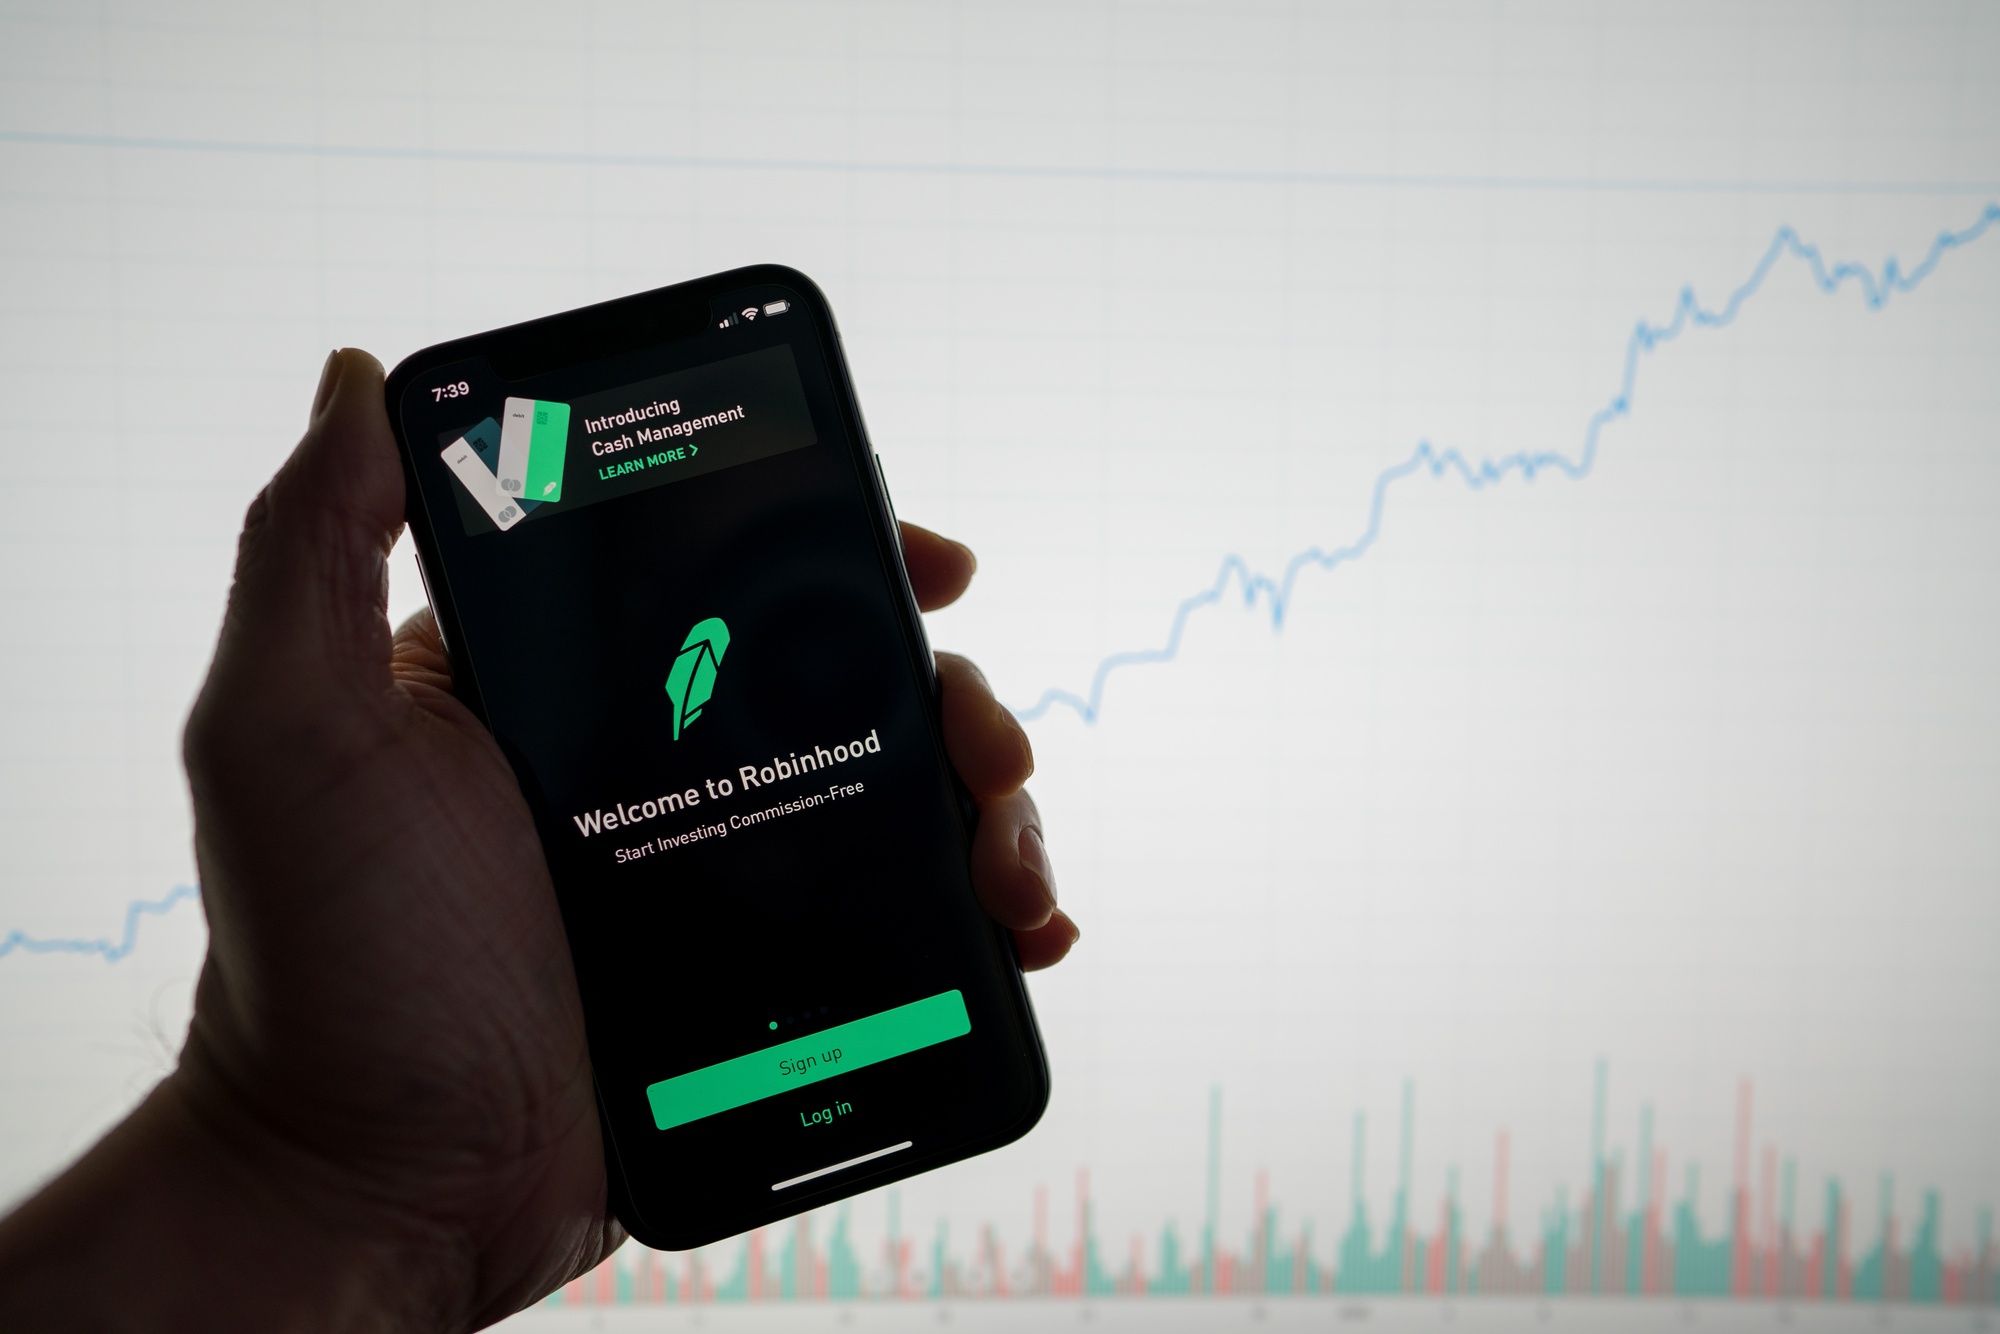 Person holding phone showing Robinhood app